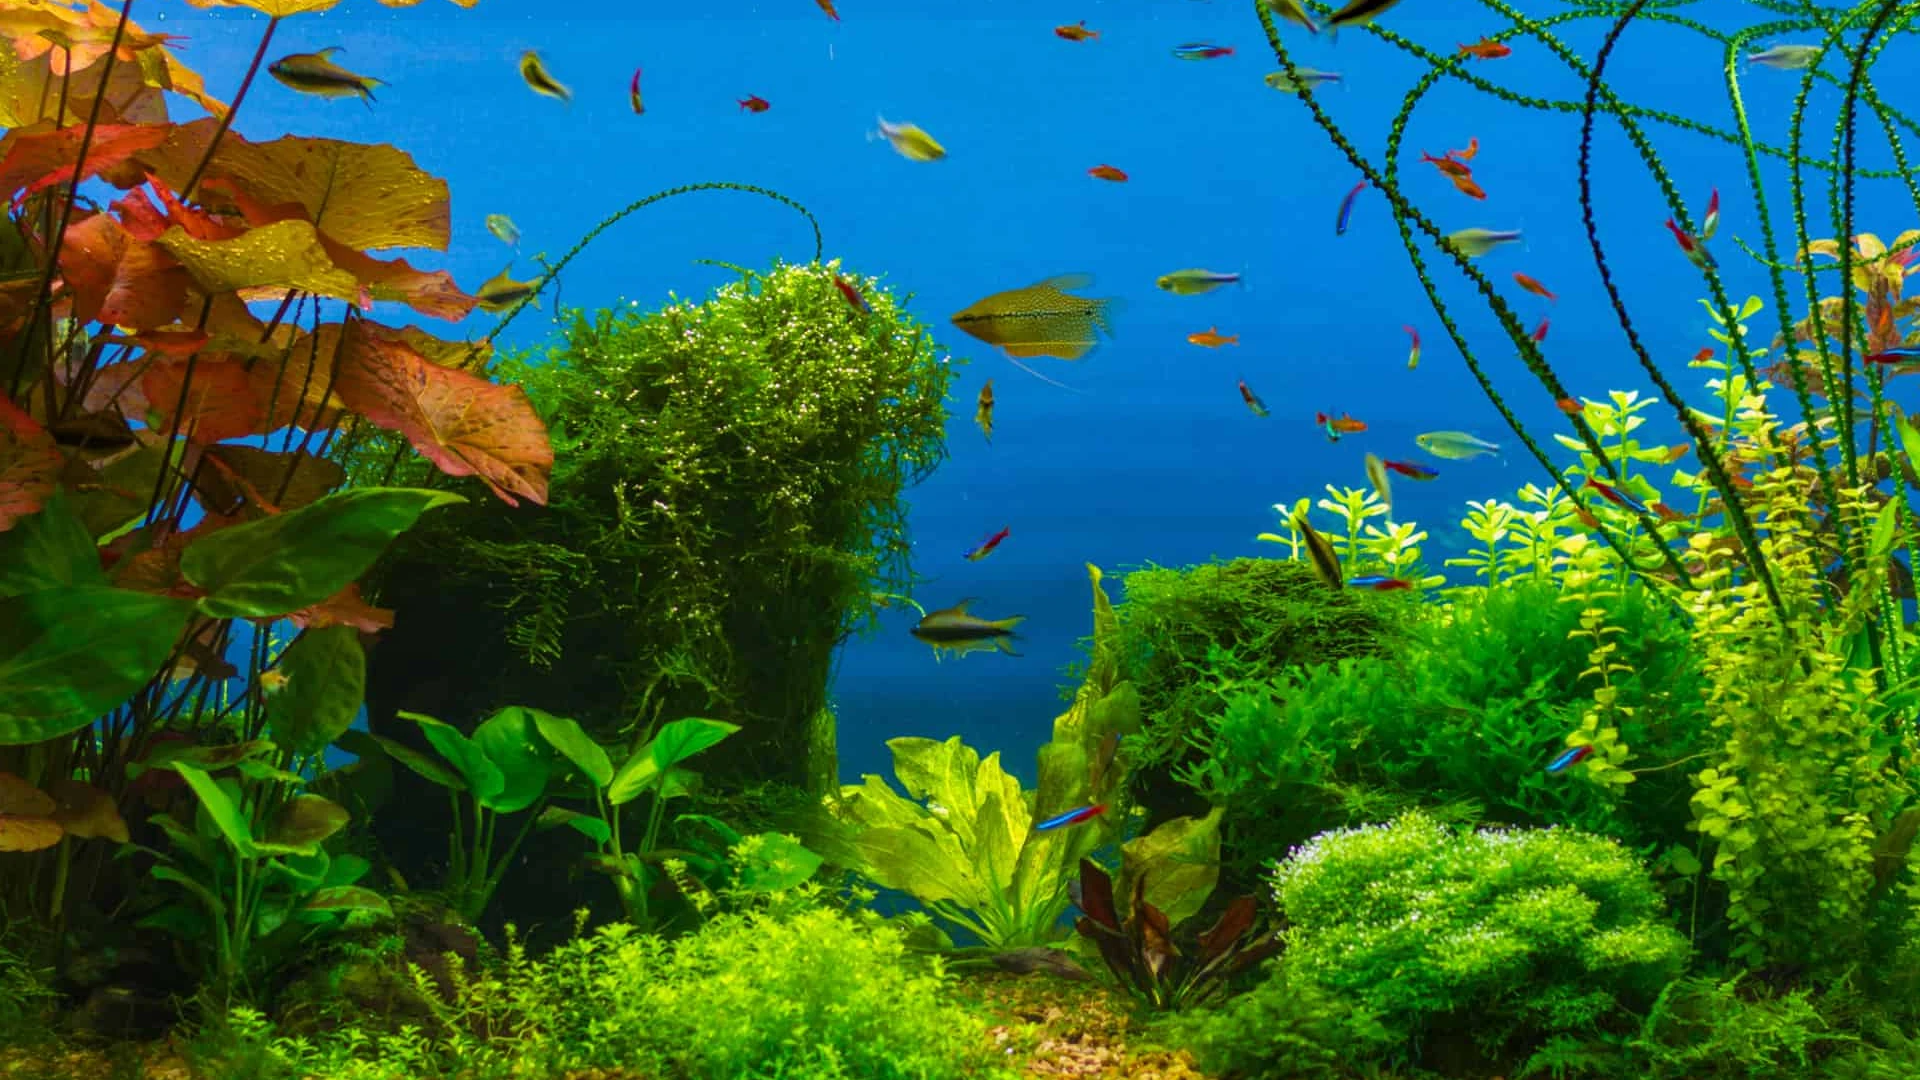 Feeding Fish Plants – What Are Some Plants That Fish Eat